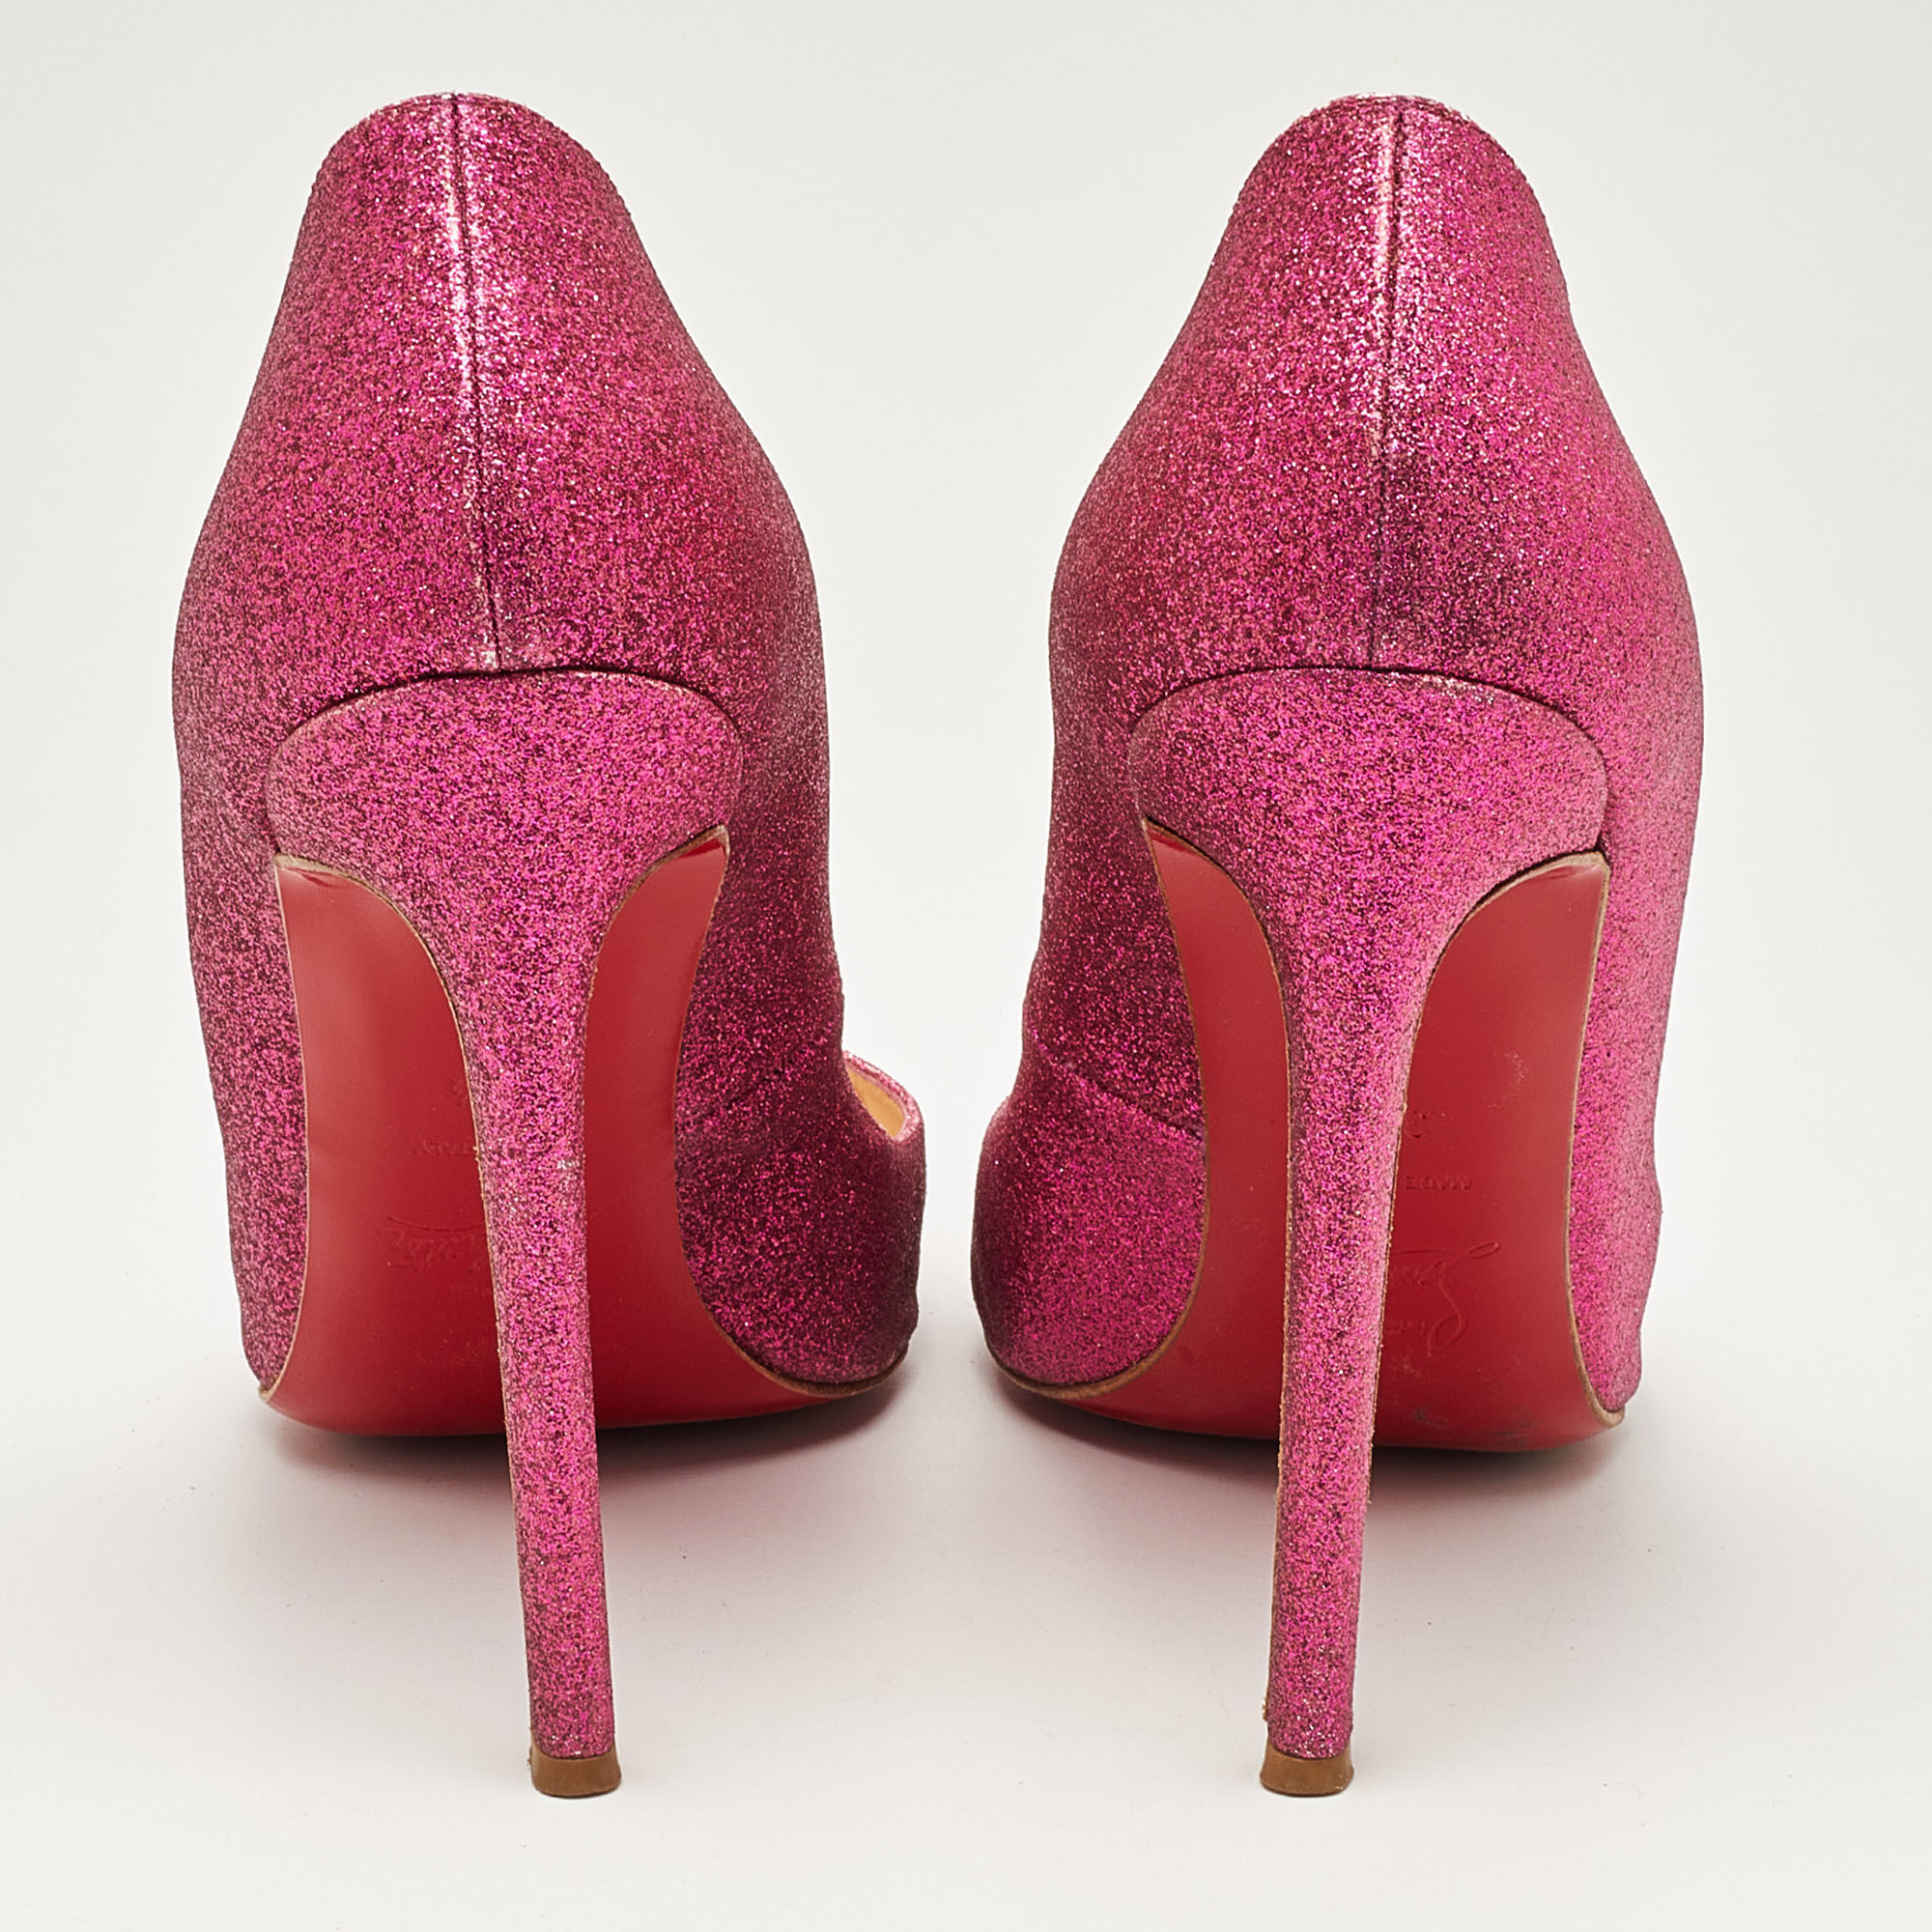 Christian Louboutin Pink Glitter Pigalle Pumps Size 39.5